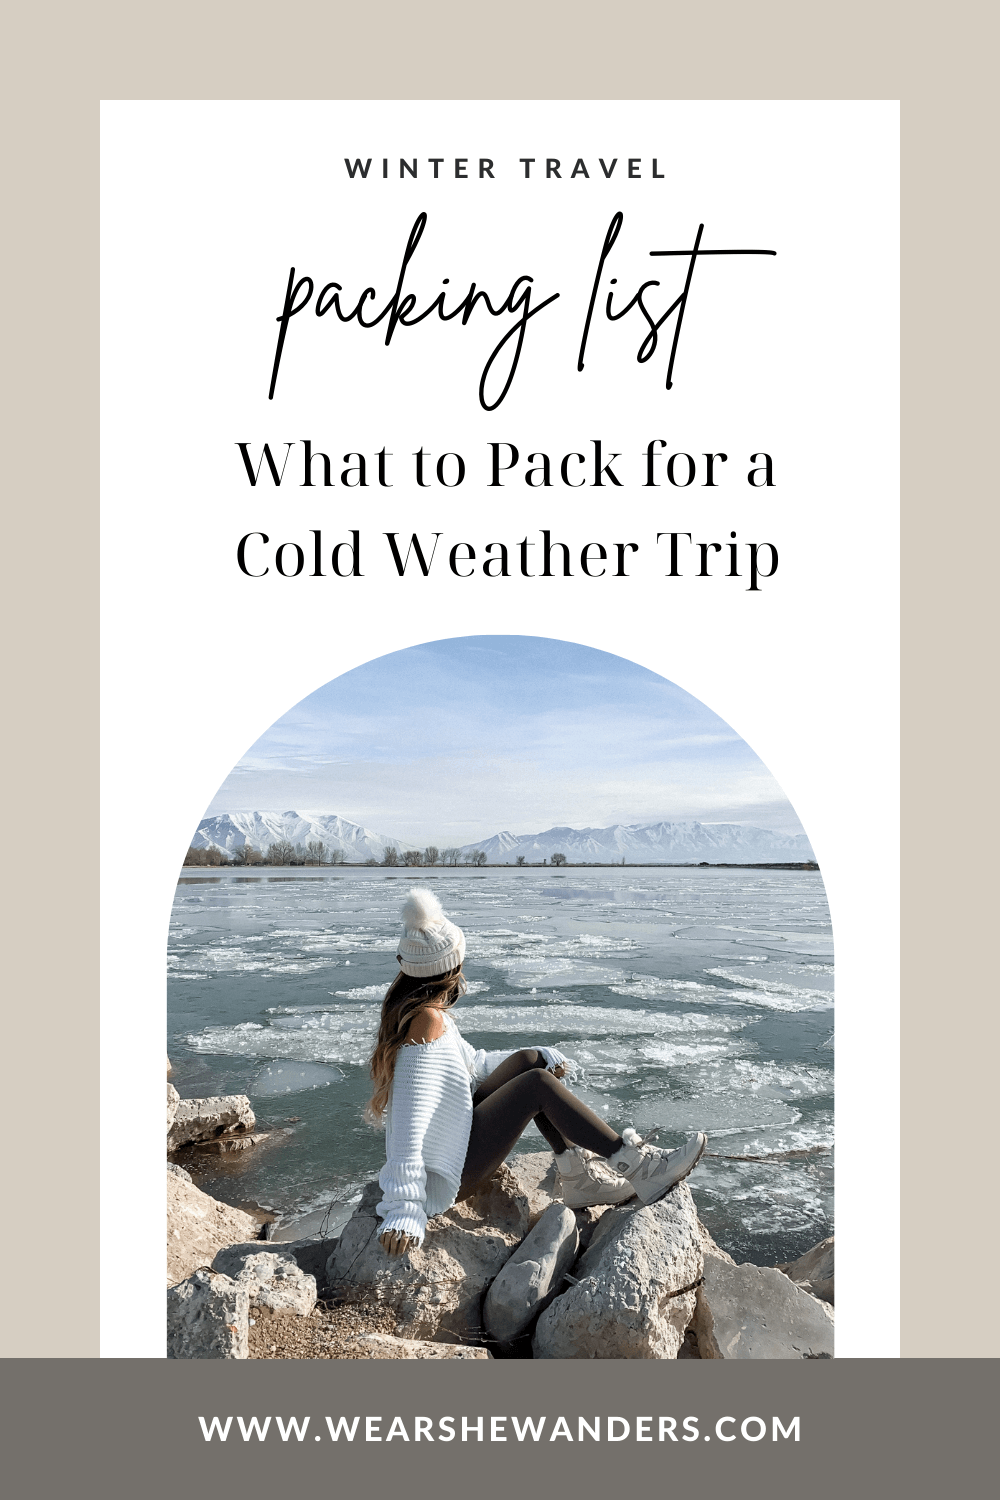 Cold Weather packing list! This is great. via Classic Glam Blog  Cold  weather packing, Cold weather packing list, Winter vacation outfits